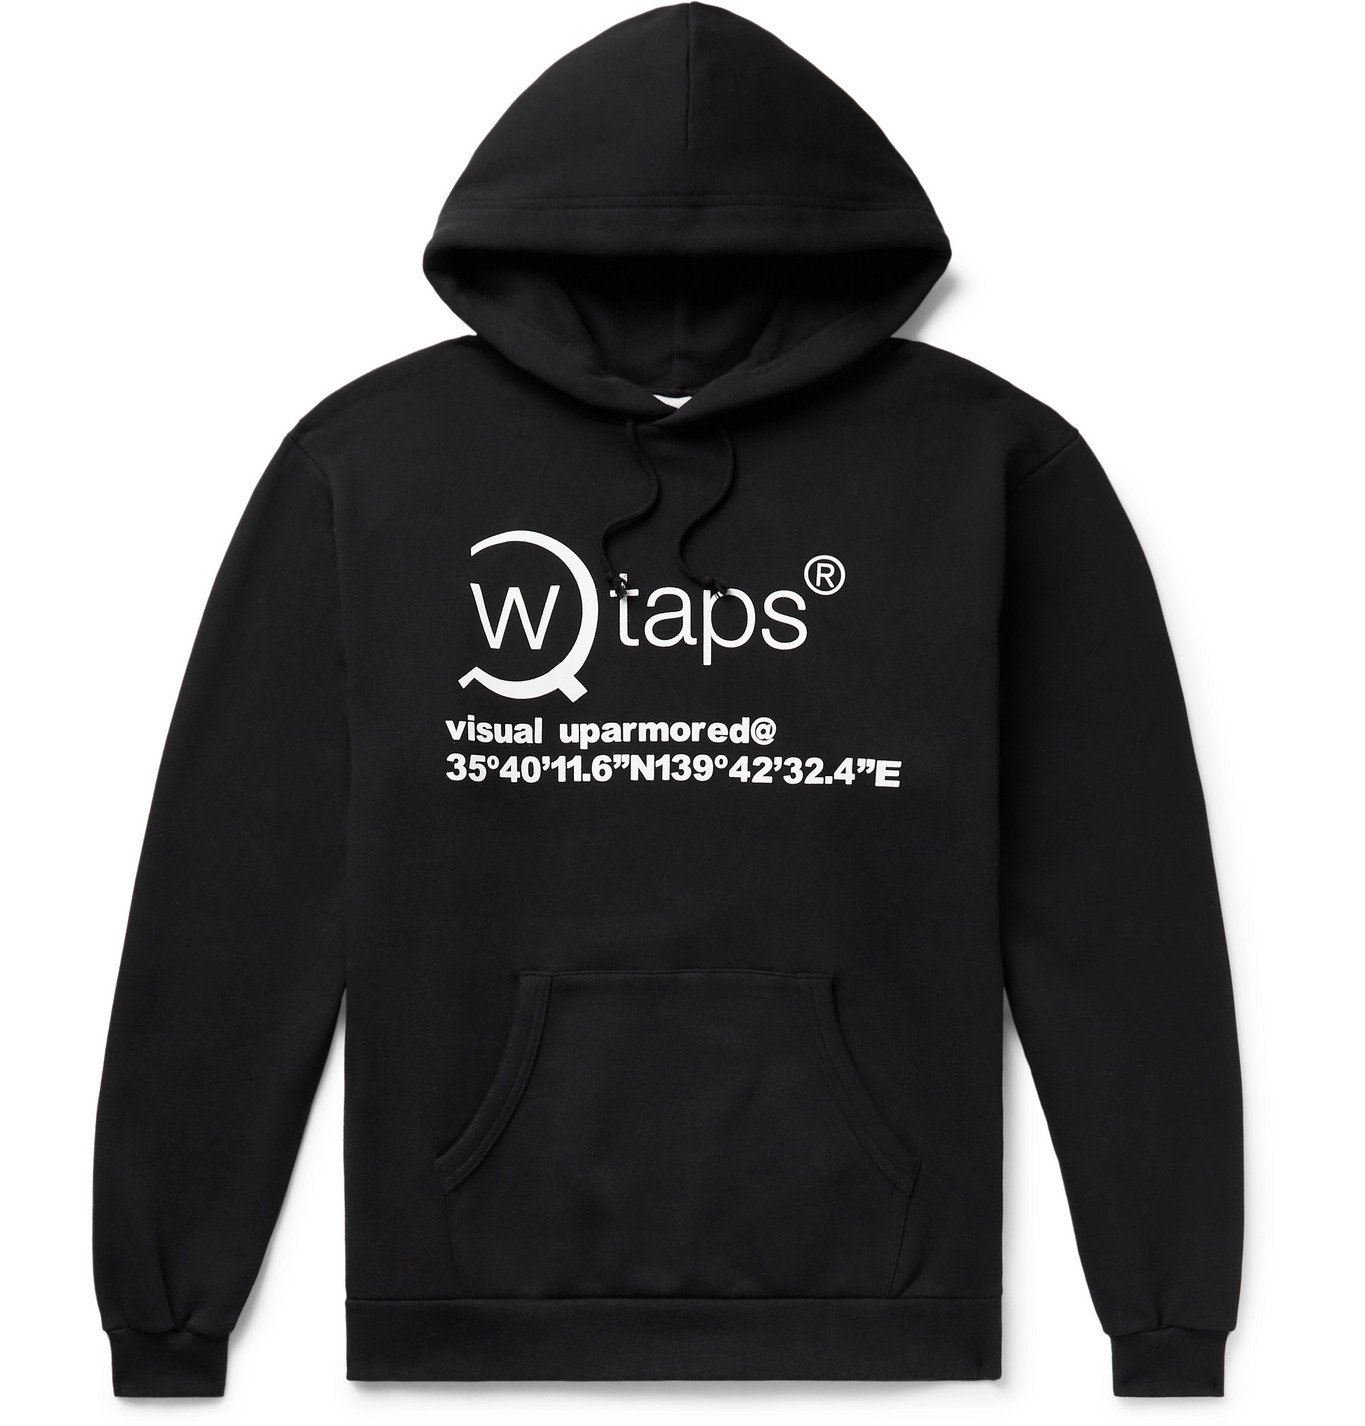 WTAPS VISUAL UPARMORED HOODY XL | myglobaltax.com